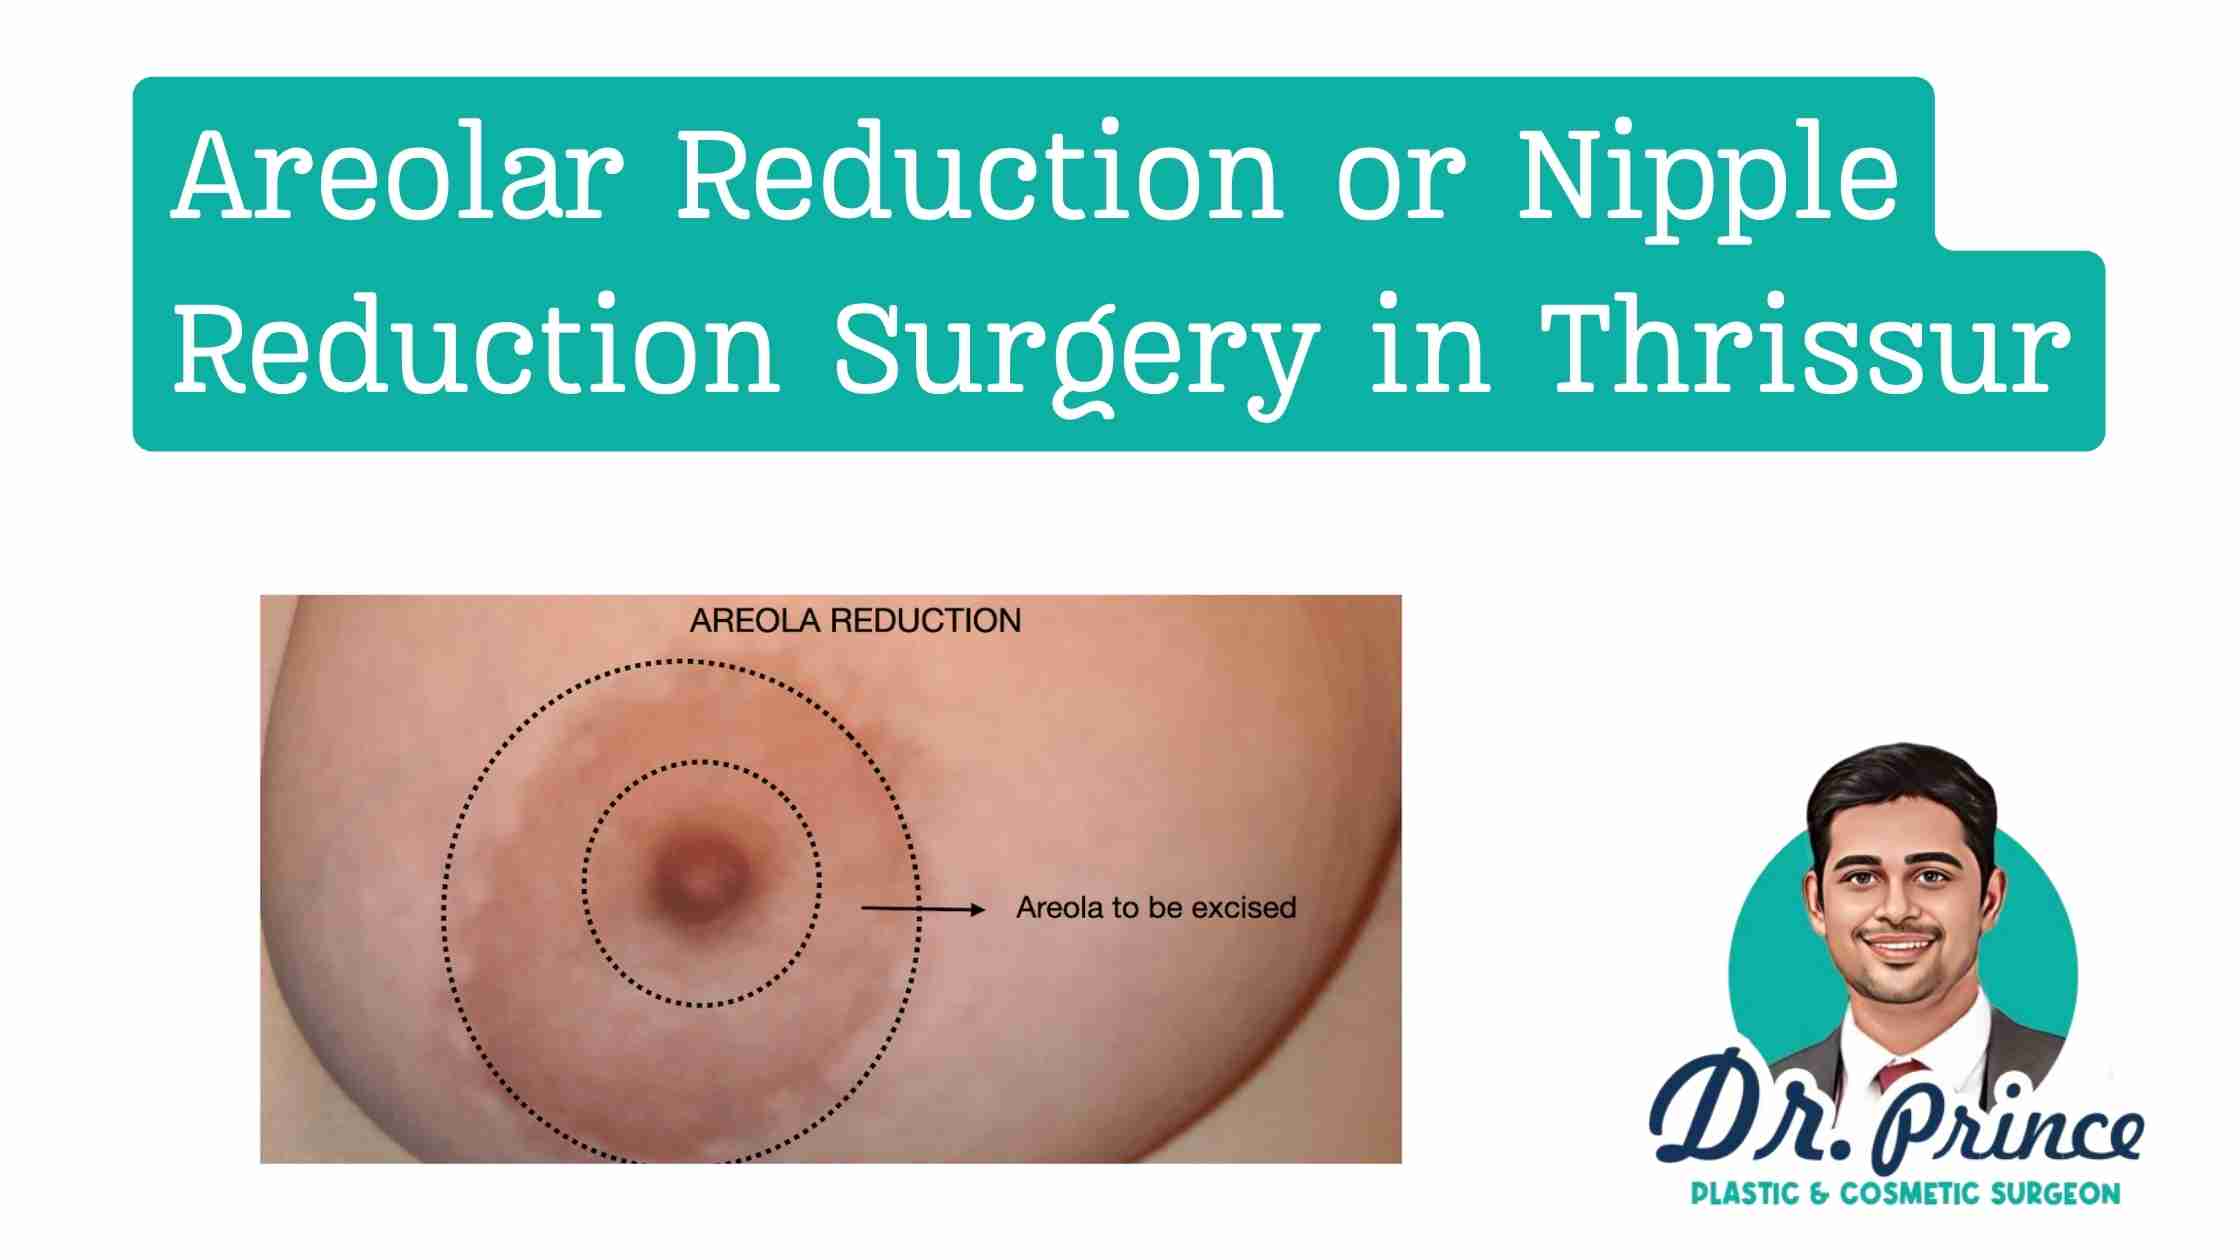 Areolar and Nipple Reduction Surgery - Dr. Prince at Sushrutha Institute of Plastic Surgery, Thrissur.